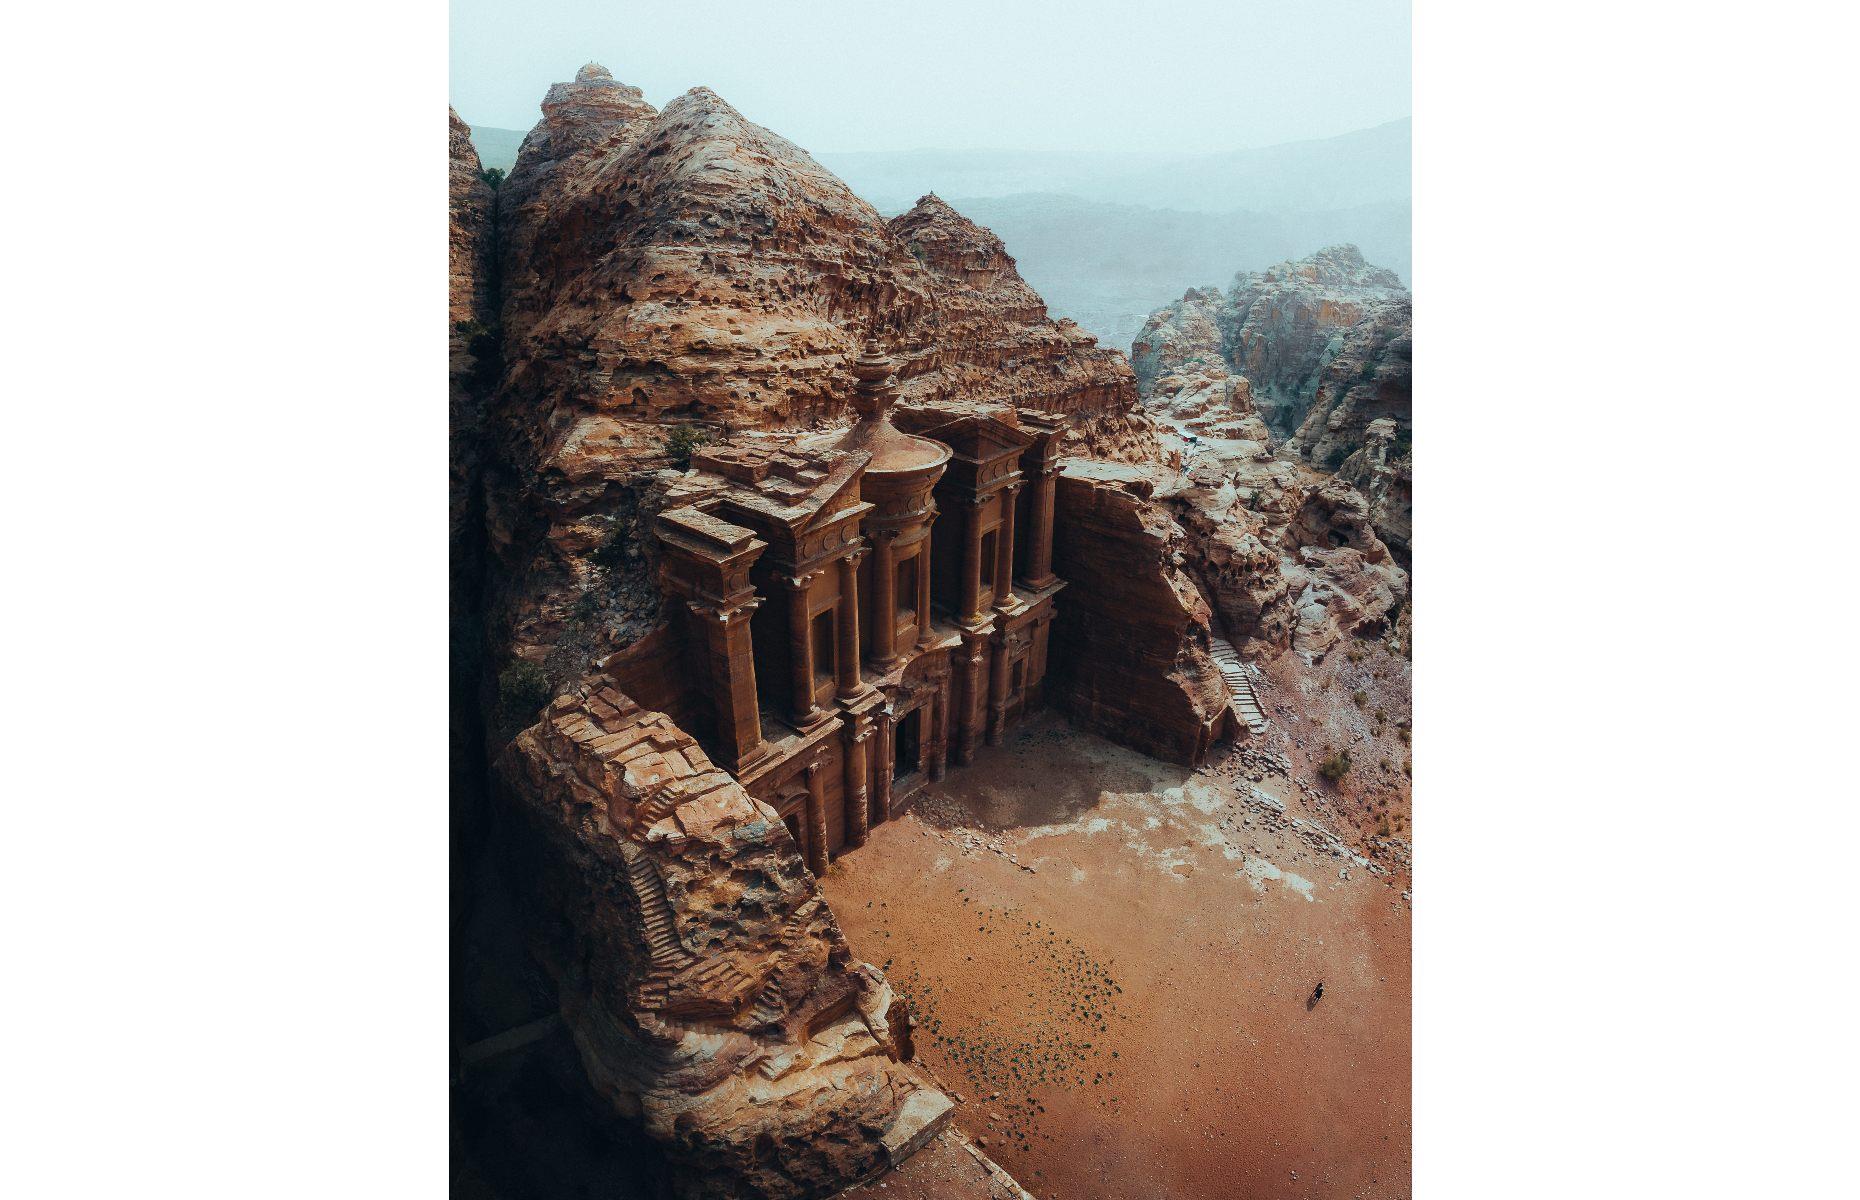 Arguably one of the most iconic monuments in the Petra Archeological Park, the Monastery (known as Ad-Dayr or Ad-Deir in Arabic) was carved directly into the cliff in the 3rd century BC, when it was initially used as a tomb. Judges praised Luke Stackpoole's use of drone photography here, which they said "makes the monastery look even more imposing and out-of-this-world."